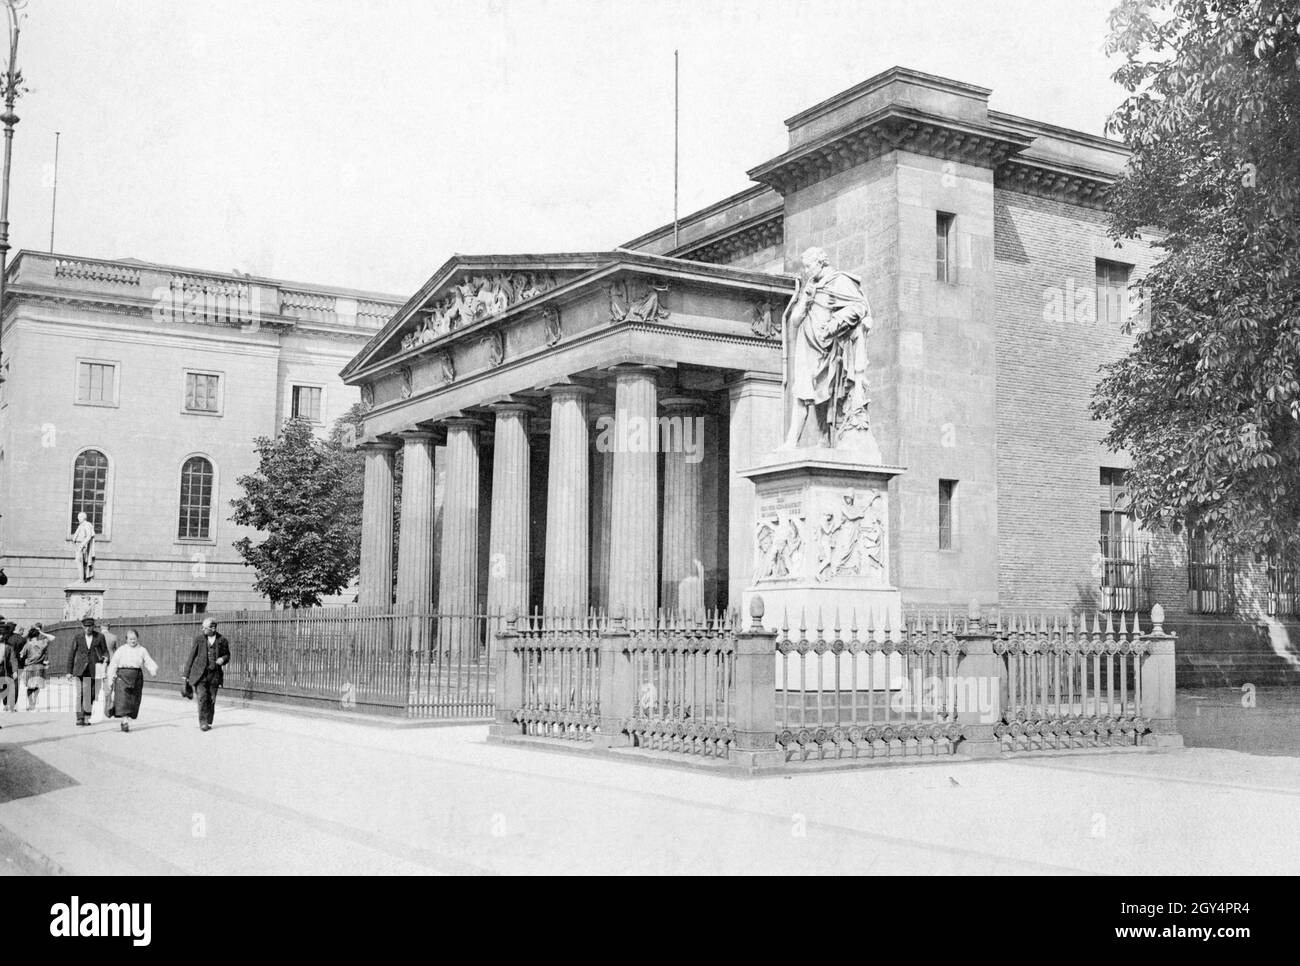 Passers-by walk past the Neue Wache with the Scharnhorst statue in Berlin-Mitte in 1926. The Humboldt University can be seen behind it. [automated translation] Stock Photo